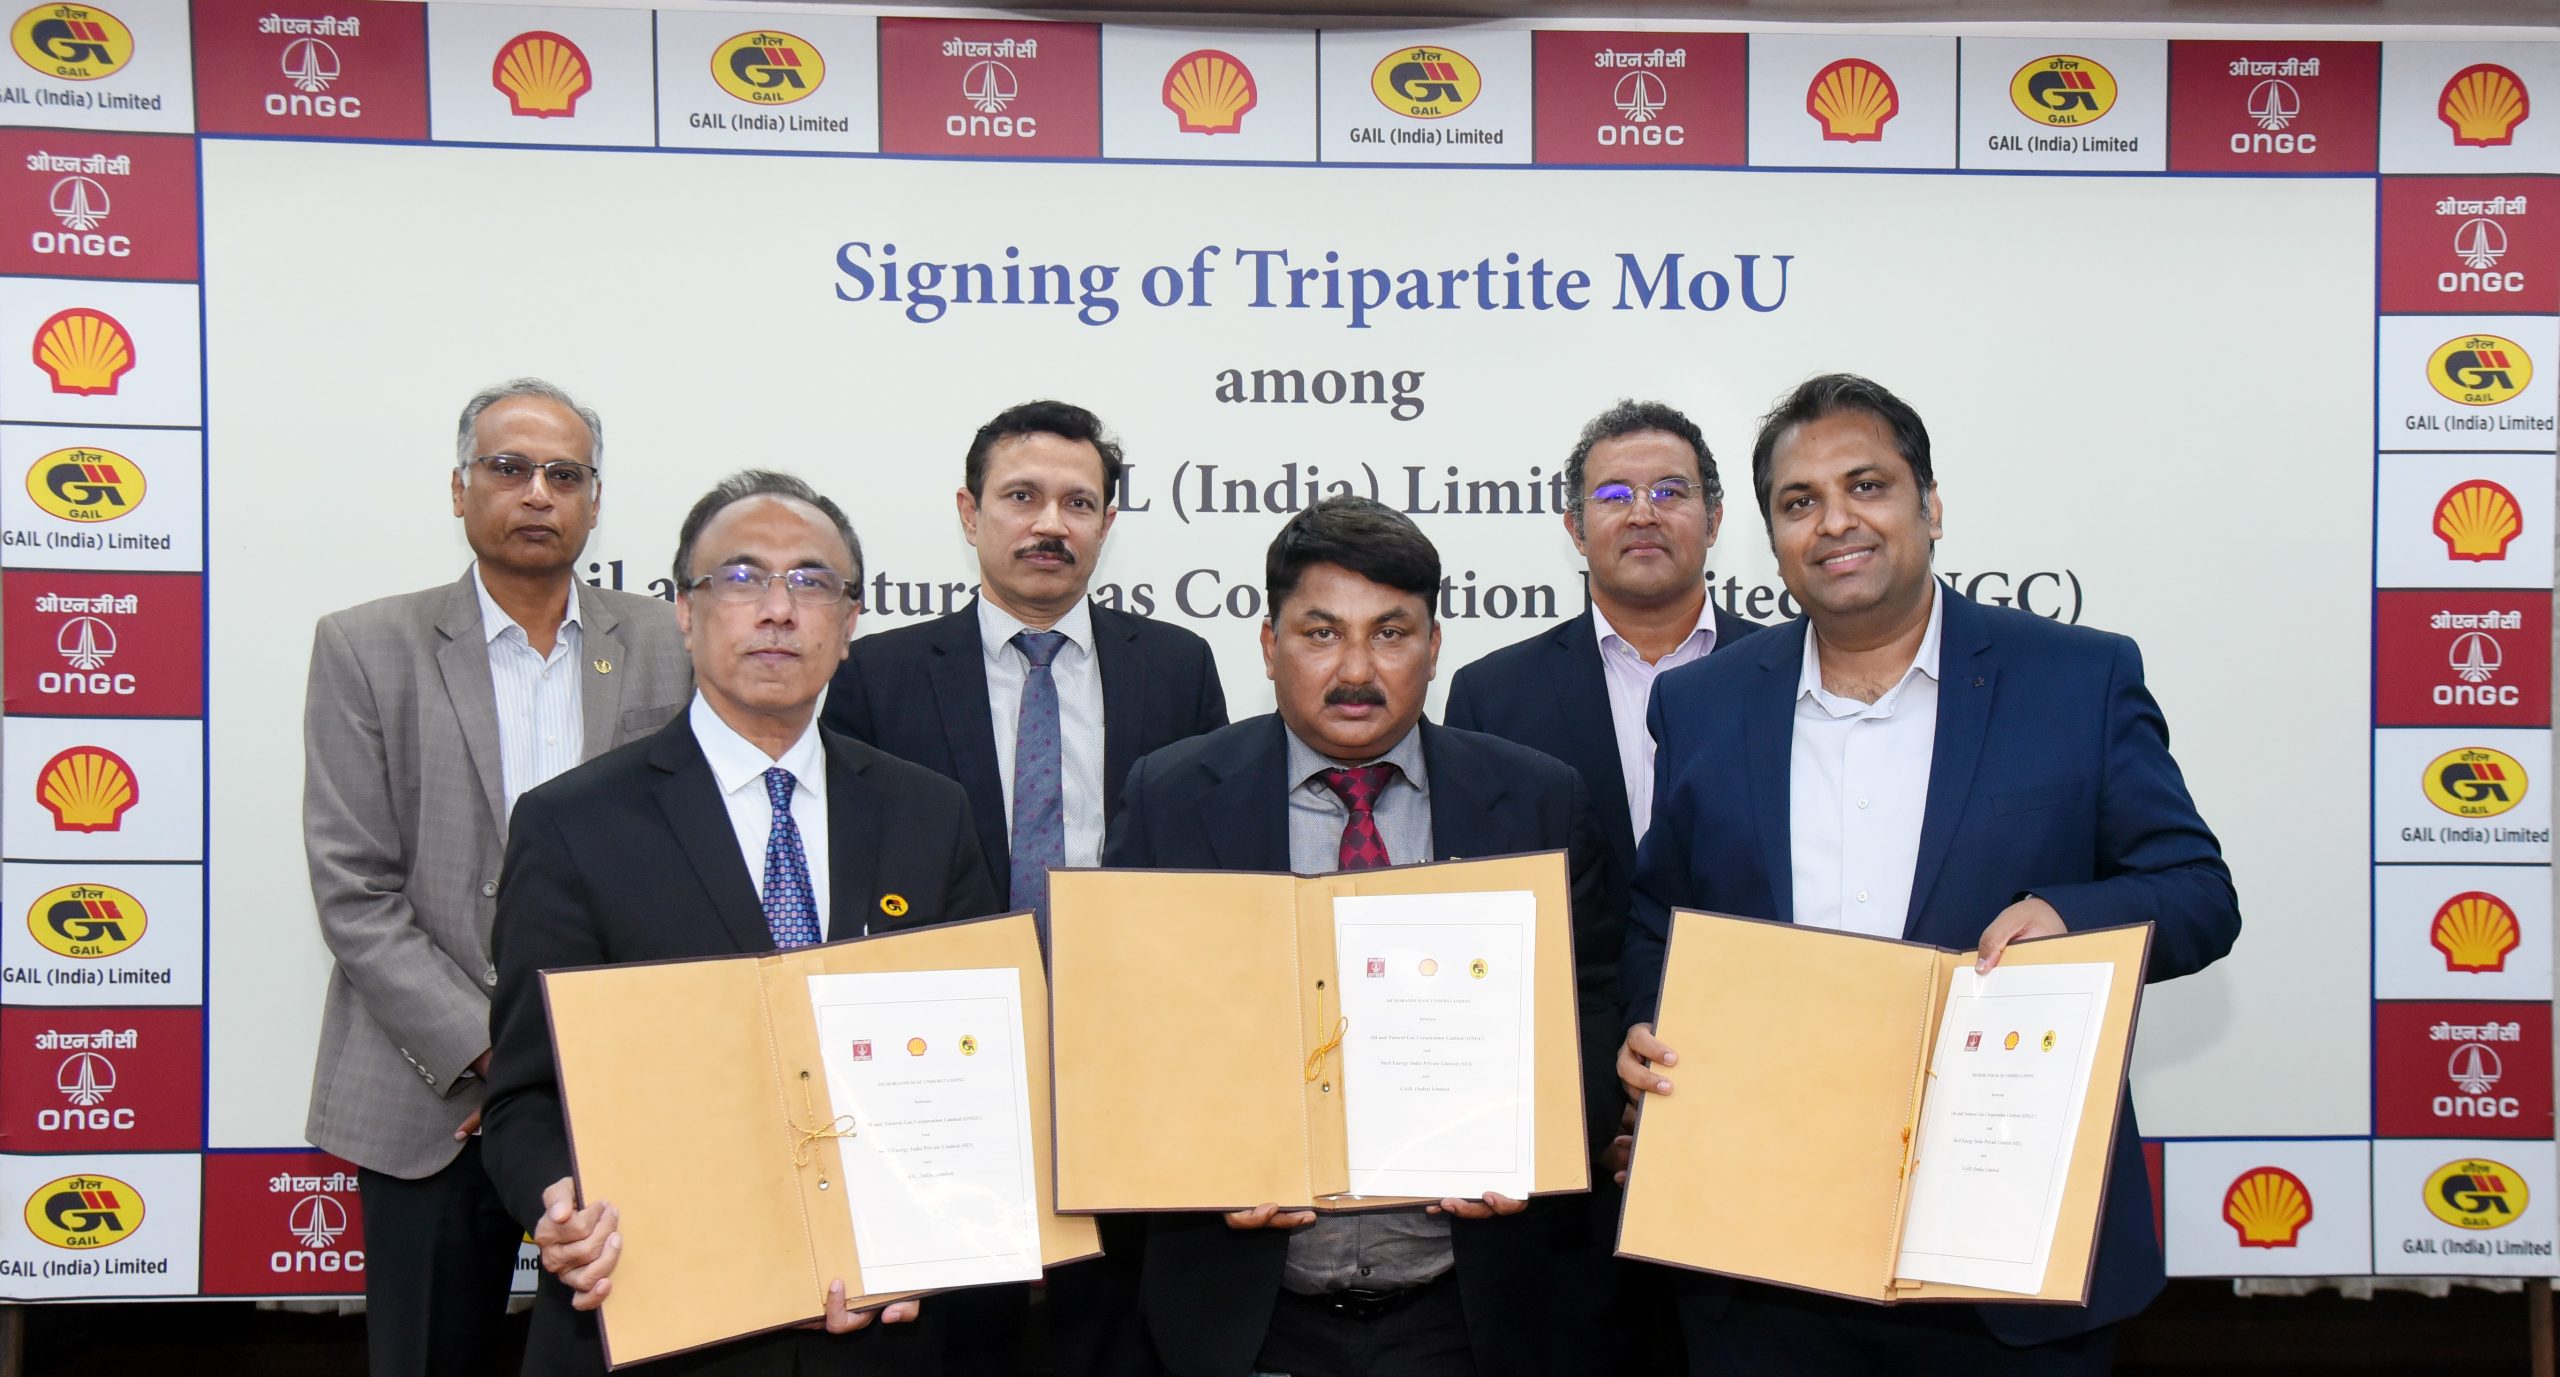 GAIL, ONGC and Shell Energy India sign tripartite MoU to explore opportunities for import of ethane and other hydrocarbons MoU to also examine development of ethane evacuation infrastructure at Shell Energy Terminal, Hazira